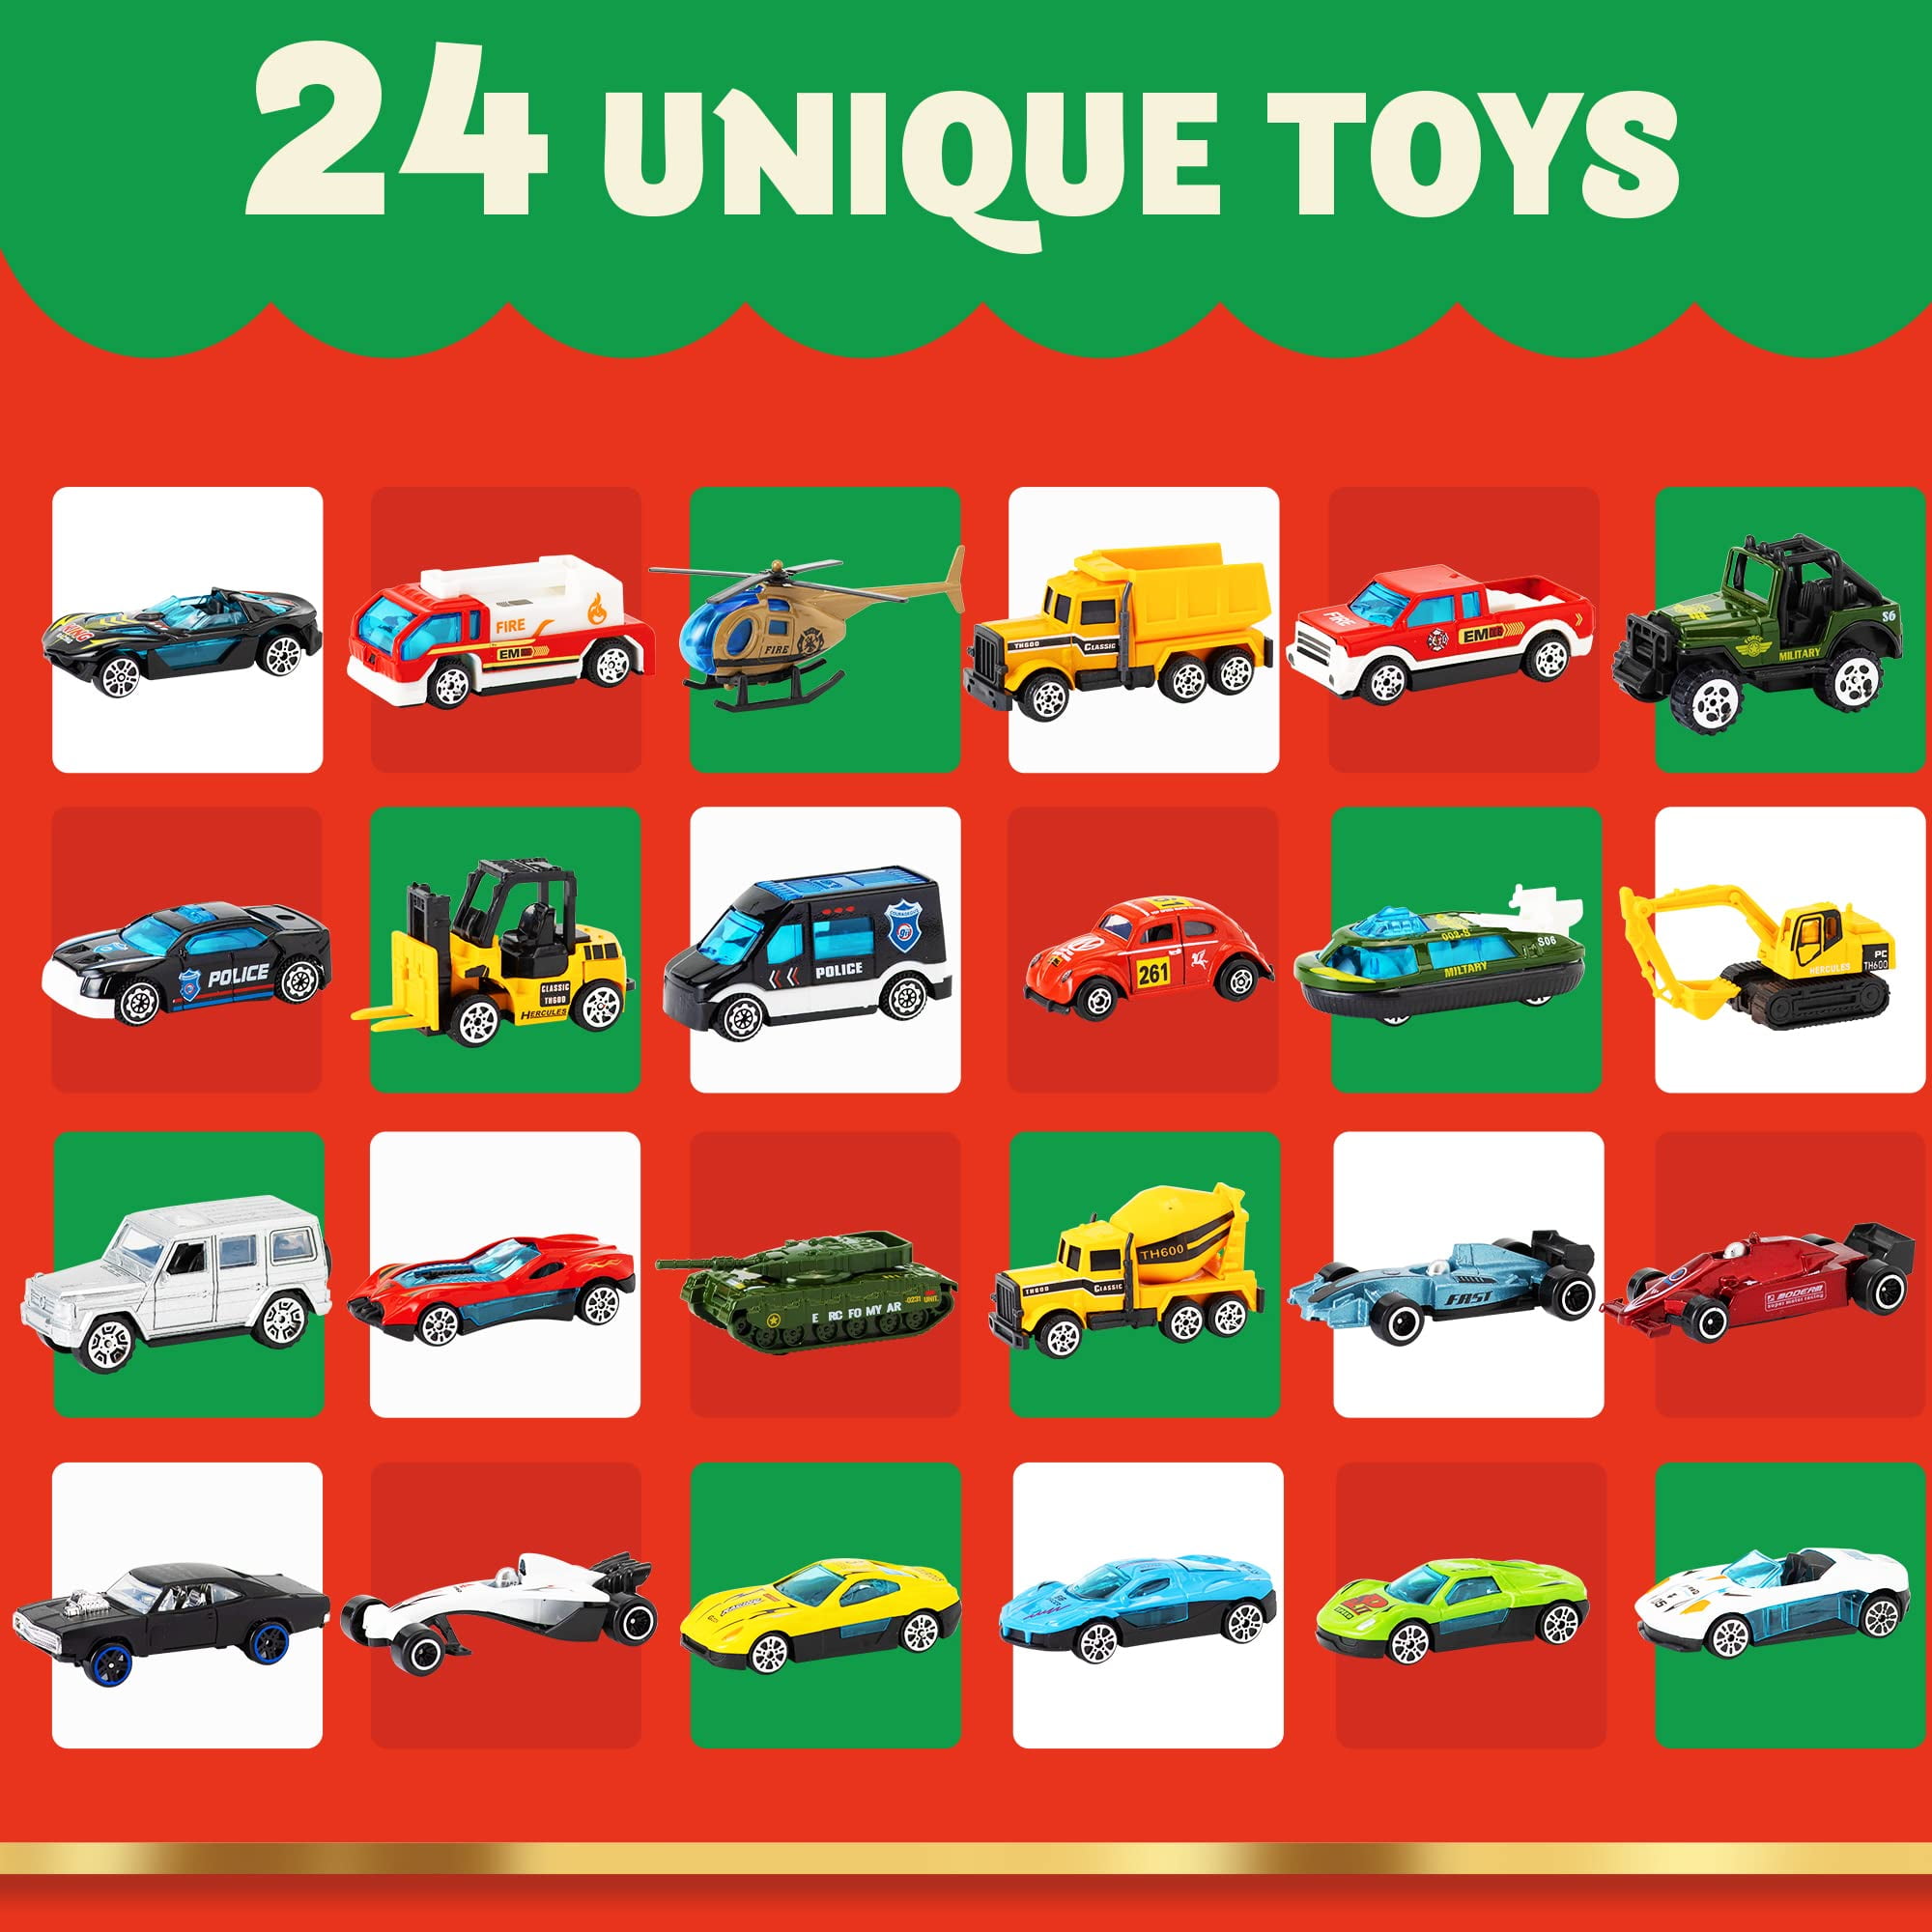 JOYIN 2023 Advent Calendar Christmas 24 Days Countdown Advent Calendar with  24 Animal Characters Including 48 Erasers Puzzle in 24 Windows Miniature